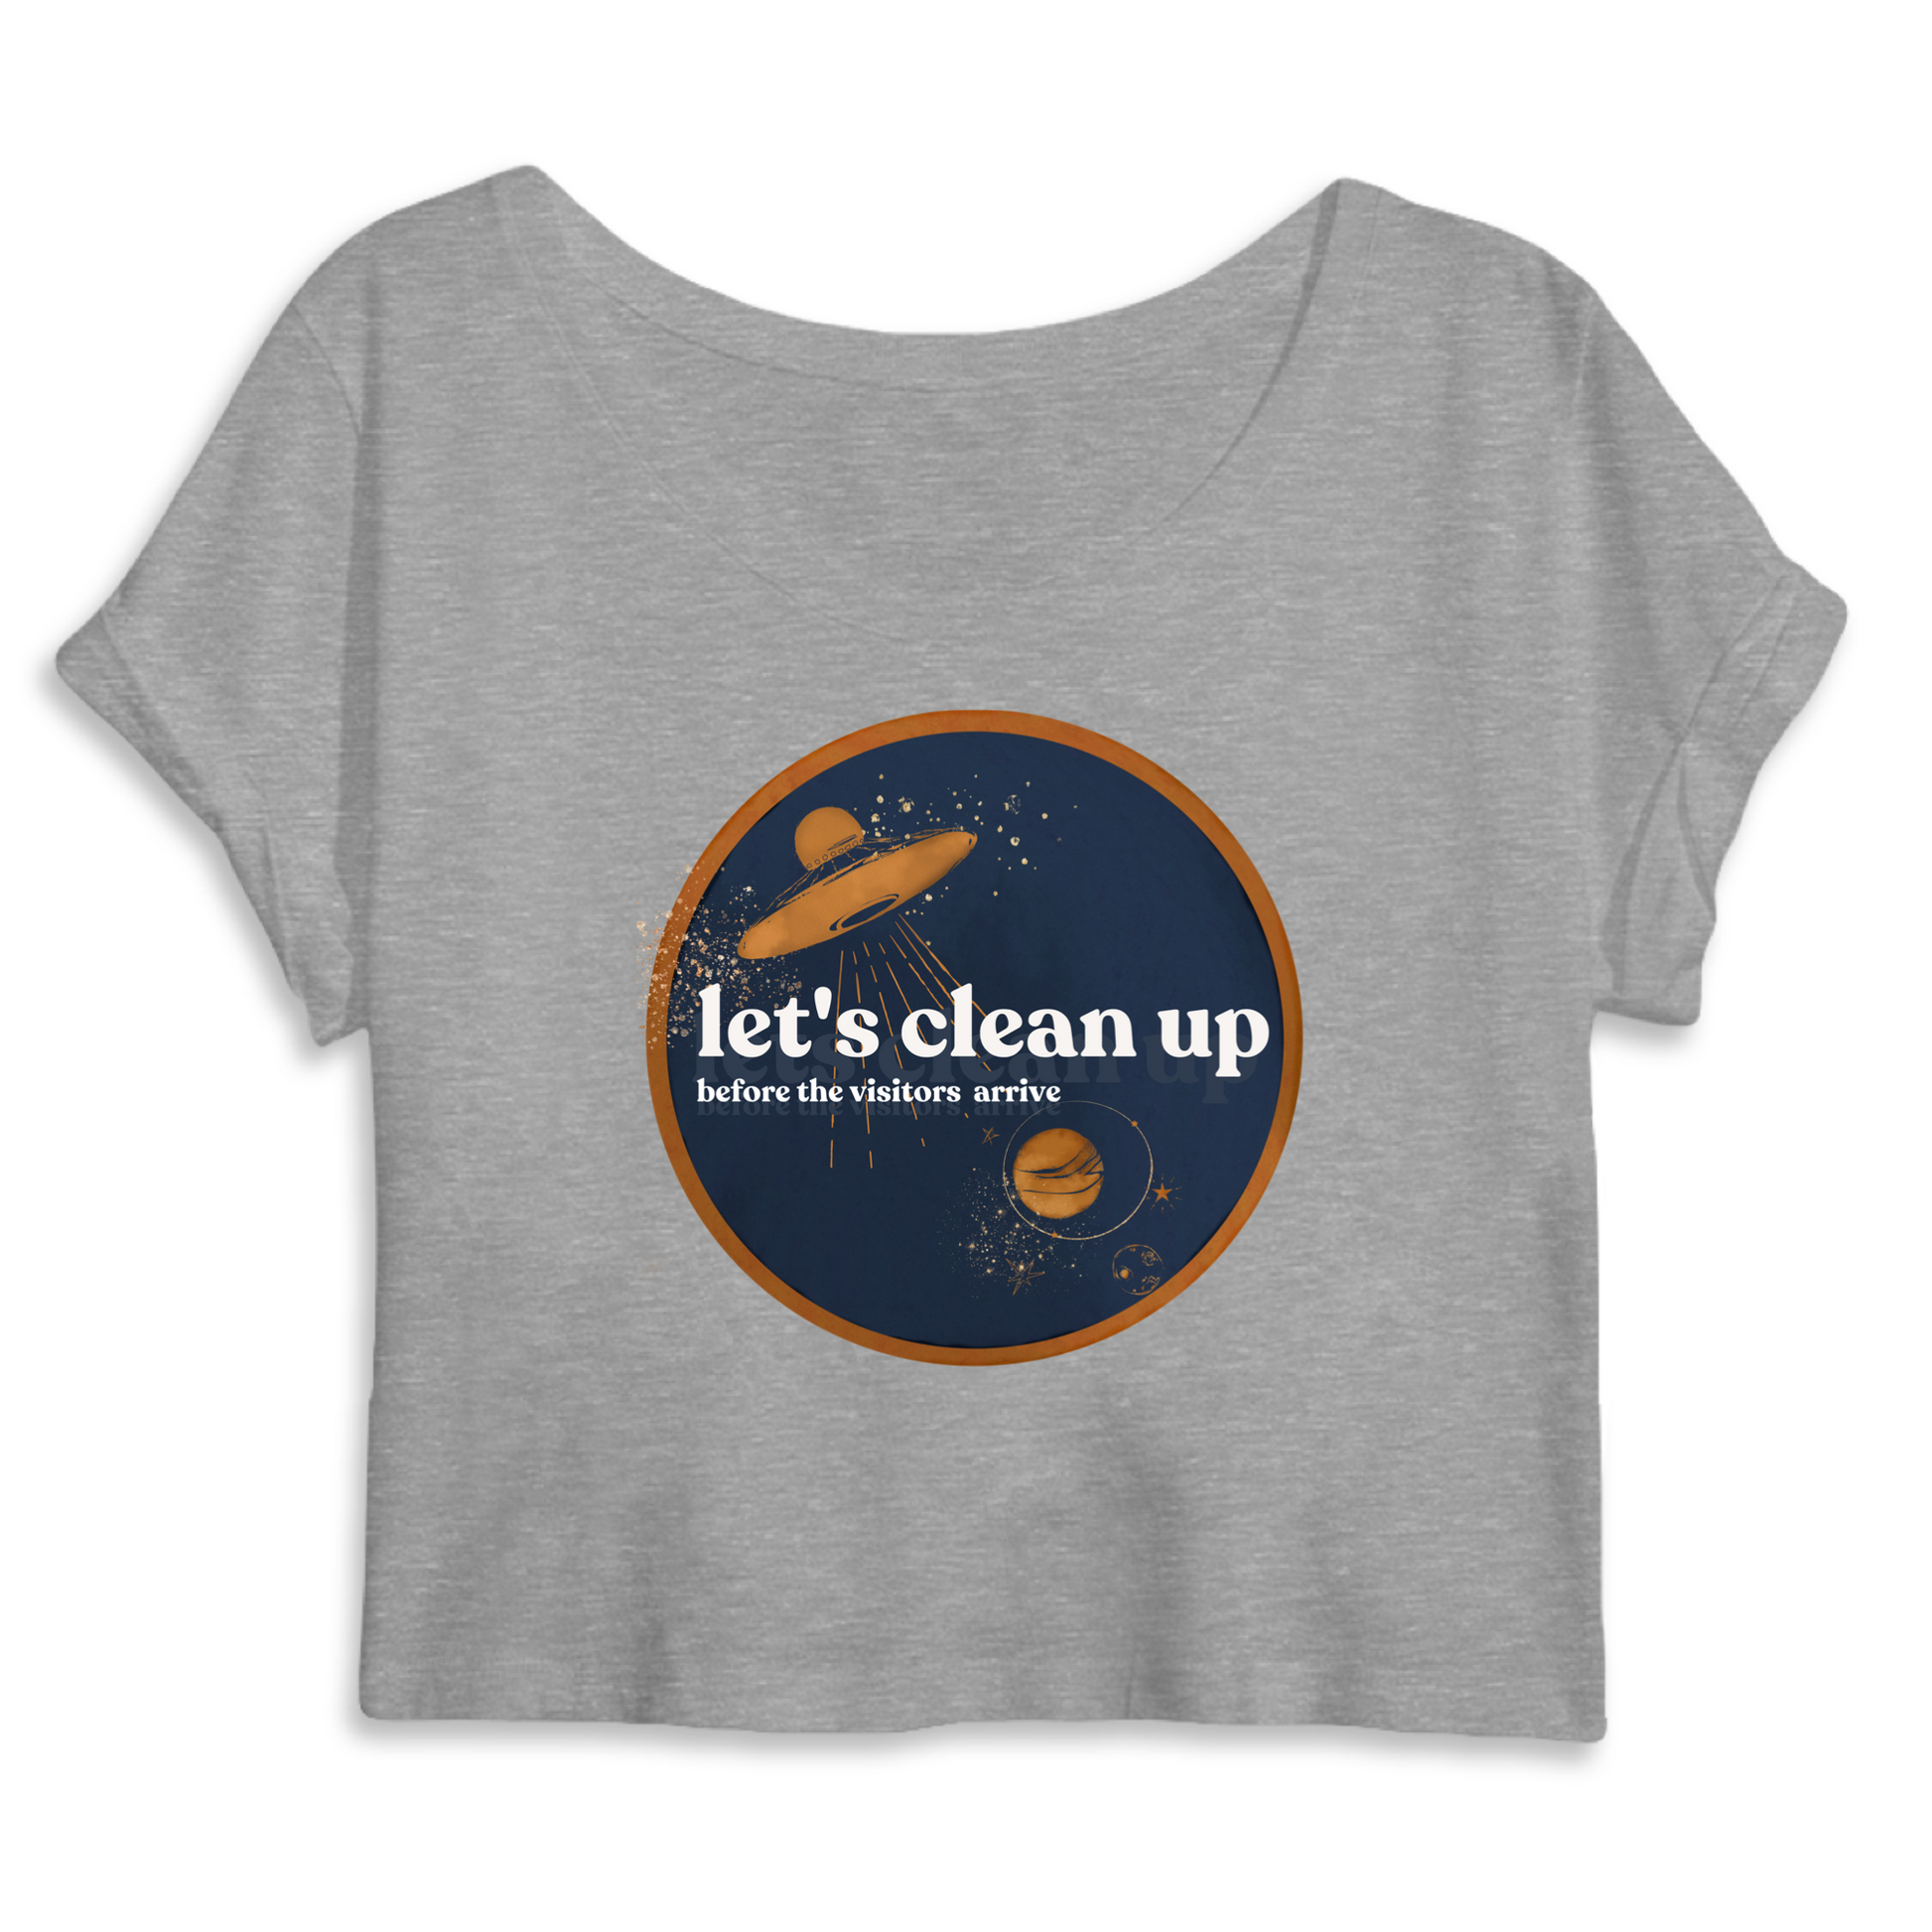 GreyLets clean up, Tees Organic cotton clothes for women, Organic Cotton Clothing for Women, Organic Cotton Tank Tops, Cotton Organic T Shirts, Organic Cotton T Shirt, Band Tees, Vintage Tees, Rolling Stones Bomber Jacket, Stoned Girls, She's a rainbow, Environmental Slogan Tshirt, Sustainable Fashion Ideas, Sustainable Fashion Dresses, What is sustainability in fashion, Teen sustainable fashion and ethical brands, Sustainable Fashion Course, made to order clothing, made to order shirts,